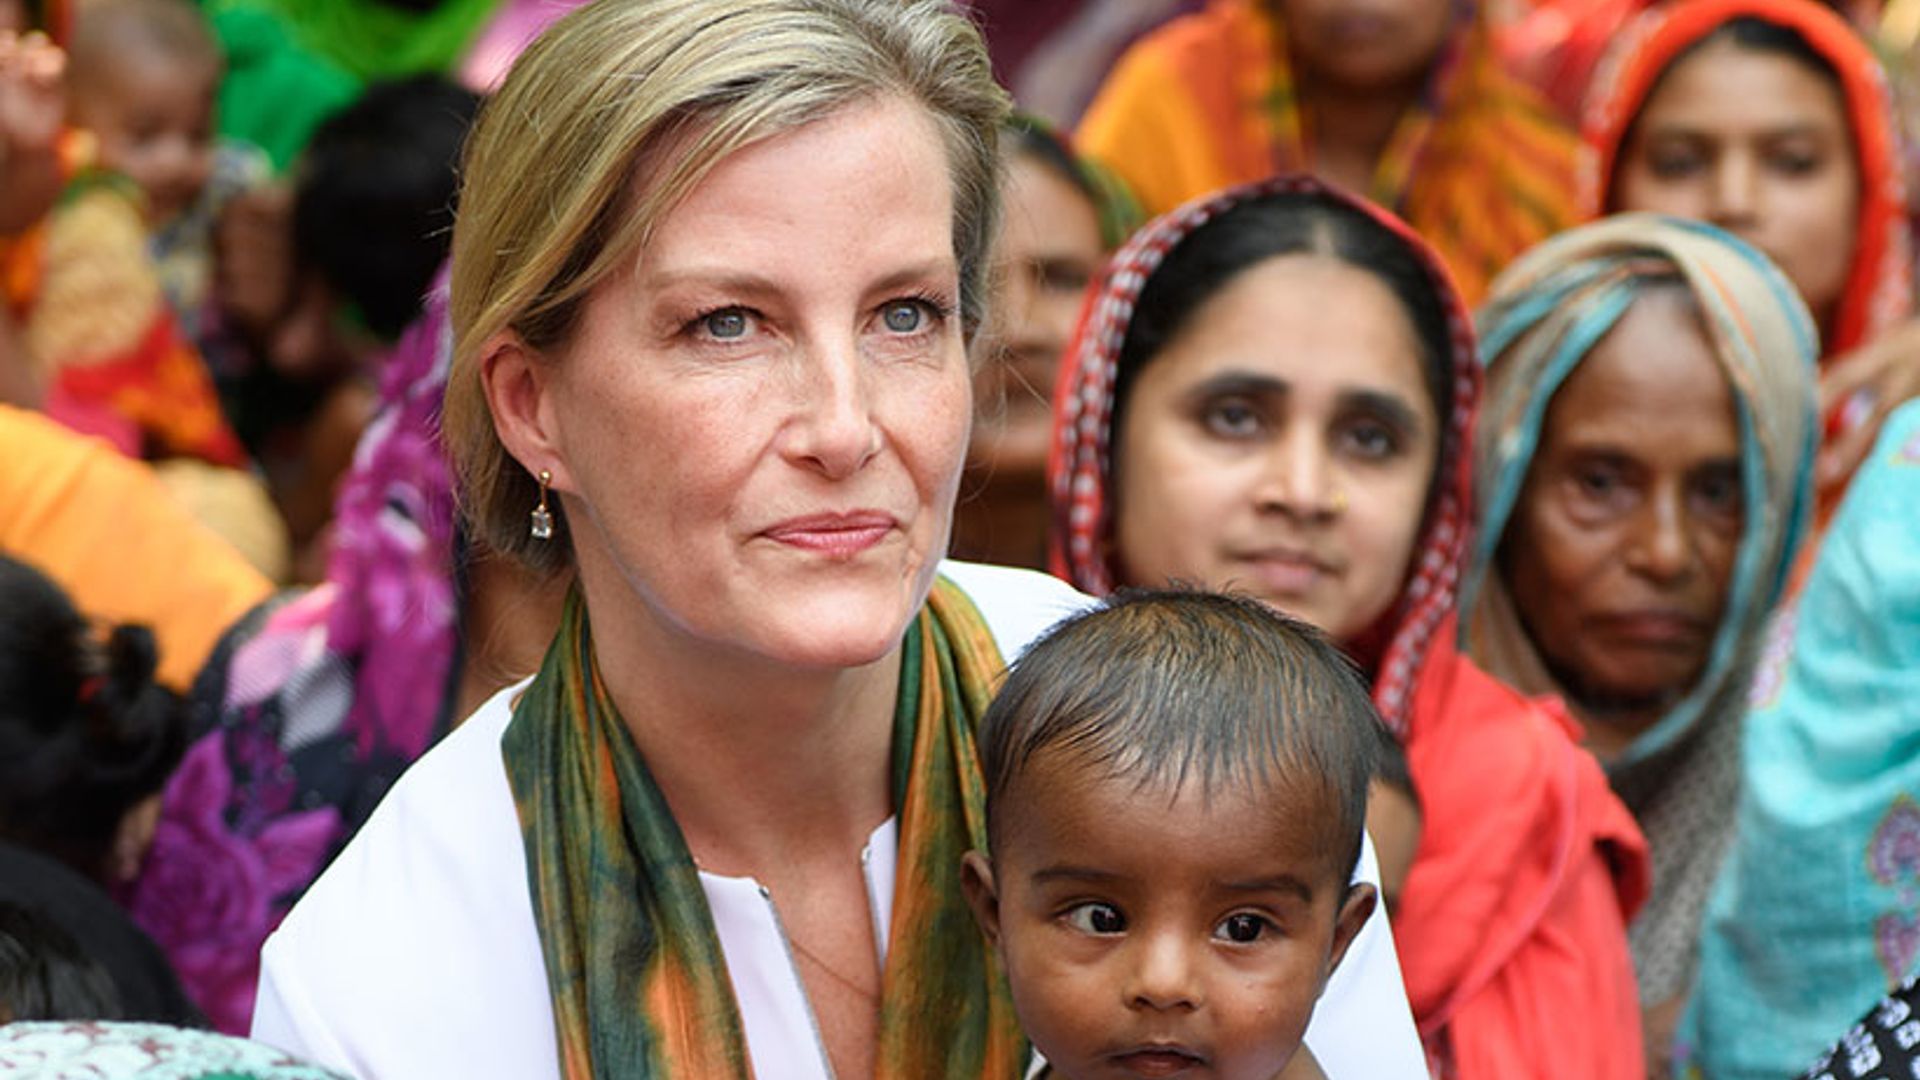 Sophie Wessex shows off her maternal side as she meets locals in Bangladesh